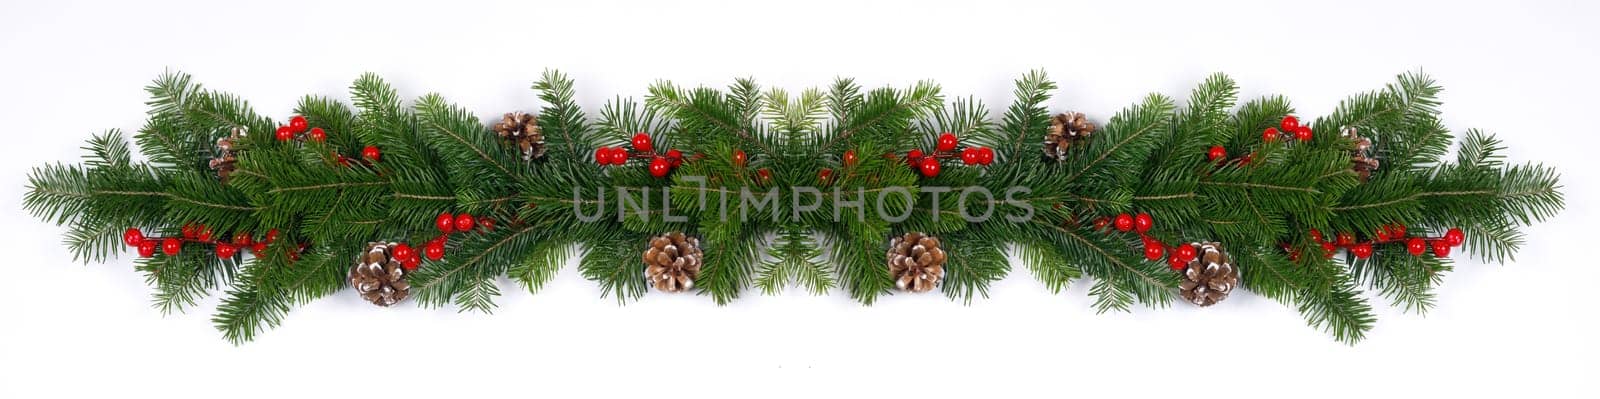 Christmas decoration design element of fir tree branches pine cones and red berries isolated on white background stripe border frame template